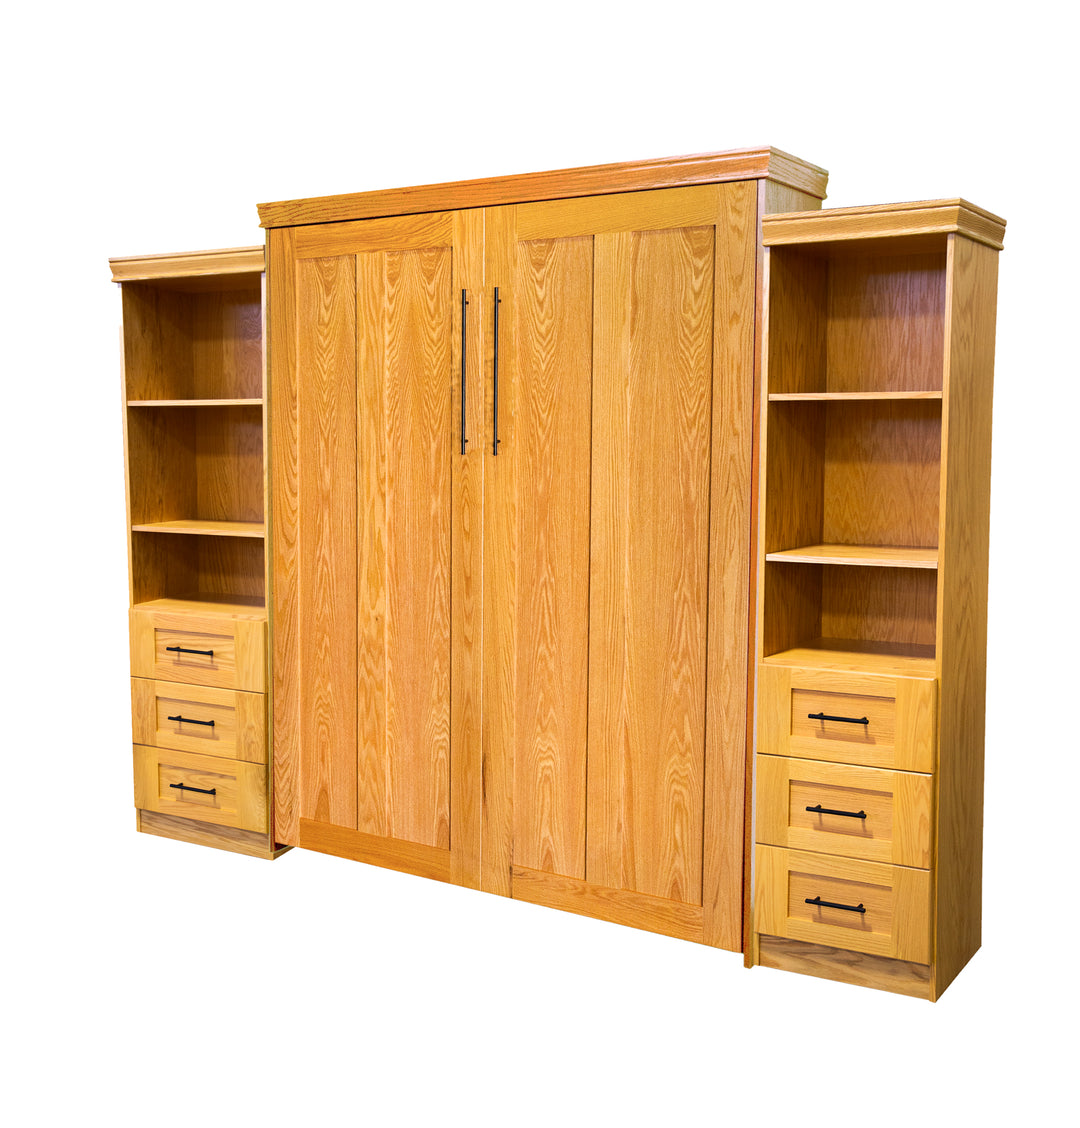 Contemporary Face Murphy Bed Vertical Queen Oak Stained Golden Oak With Side Cabinets Discounted